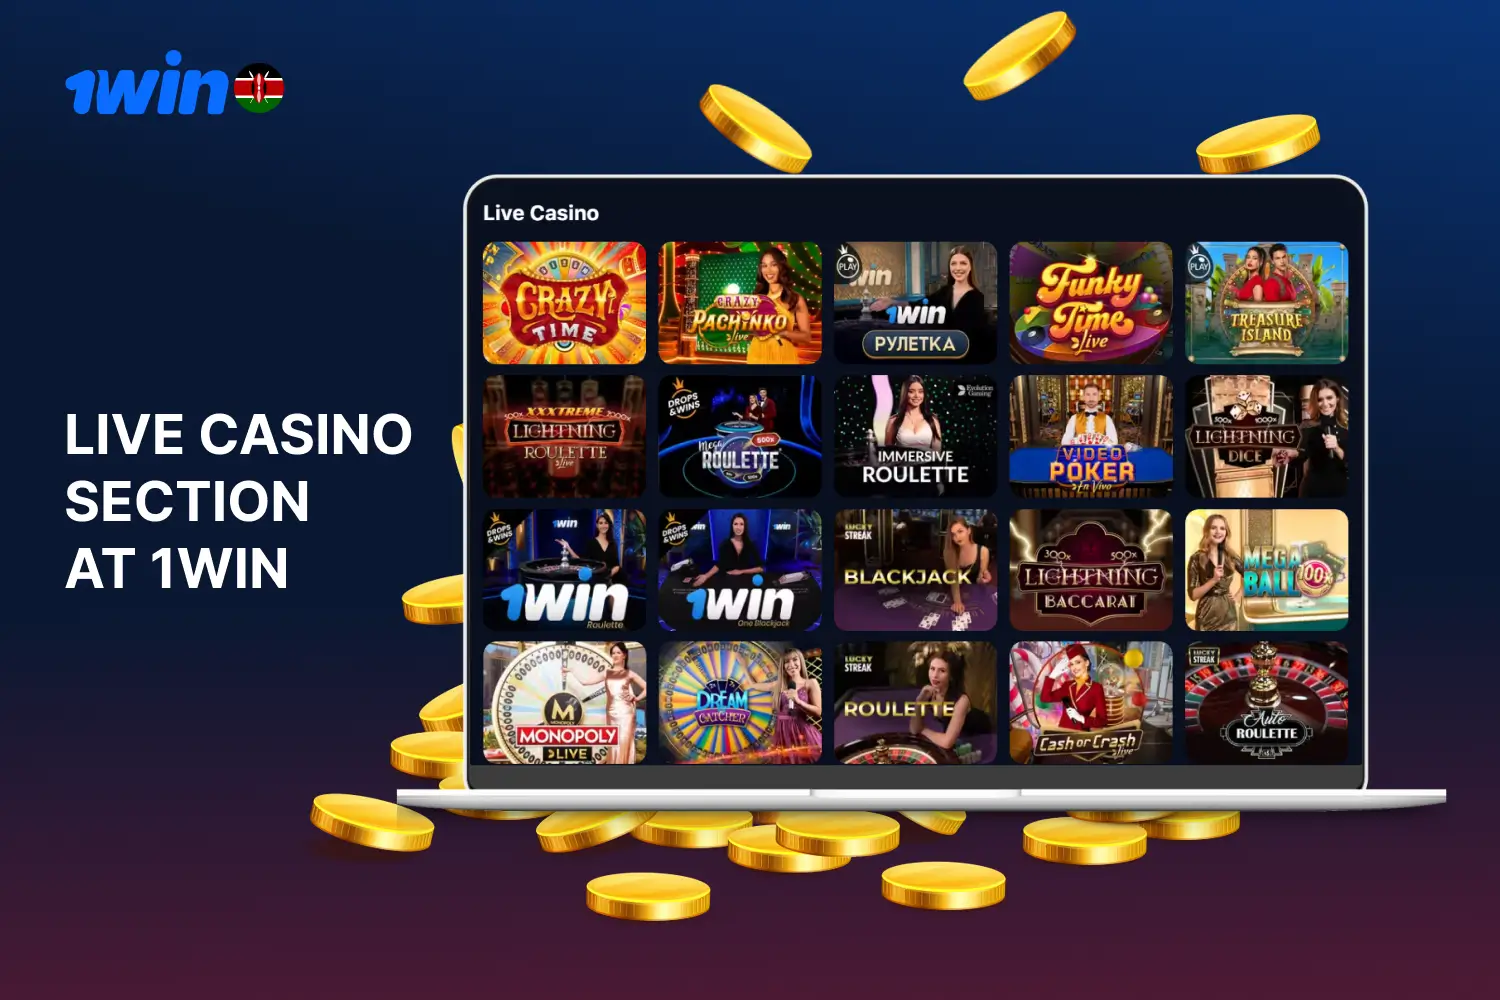 1win provides users with the opportunity to play online casinos with live dealers